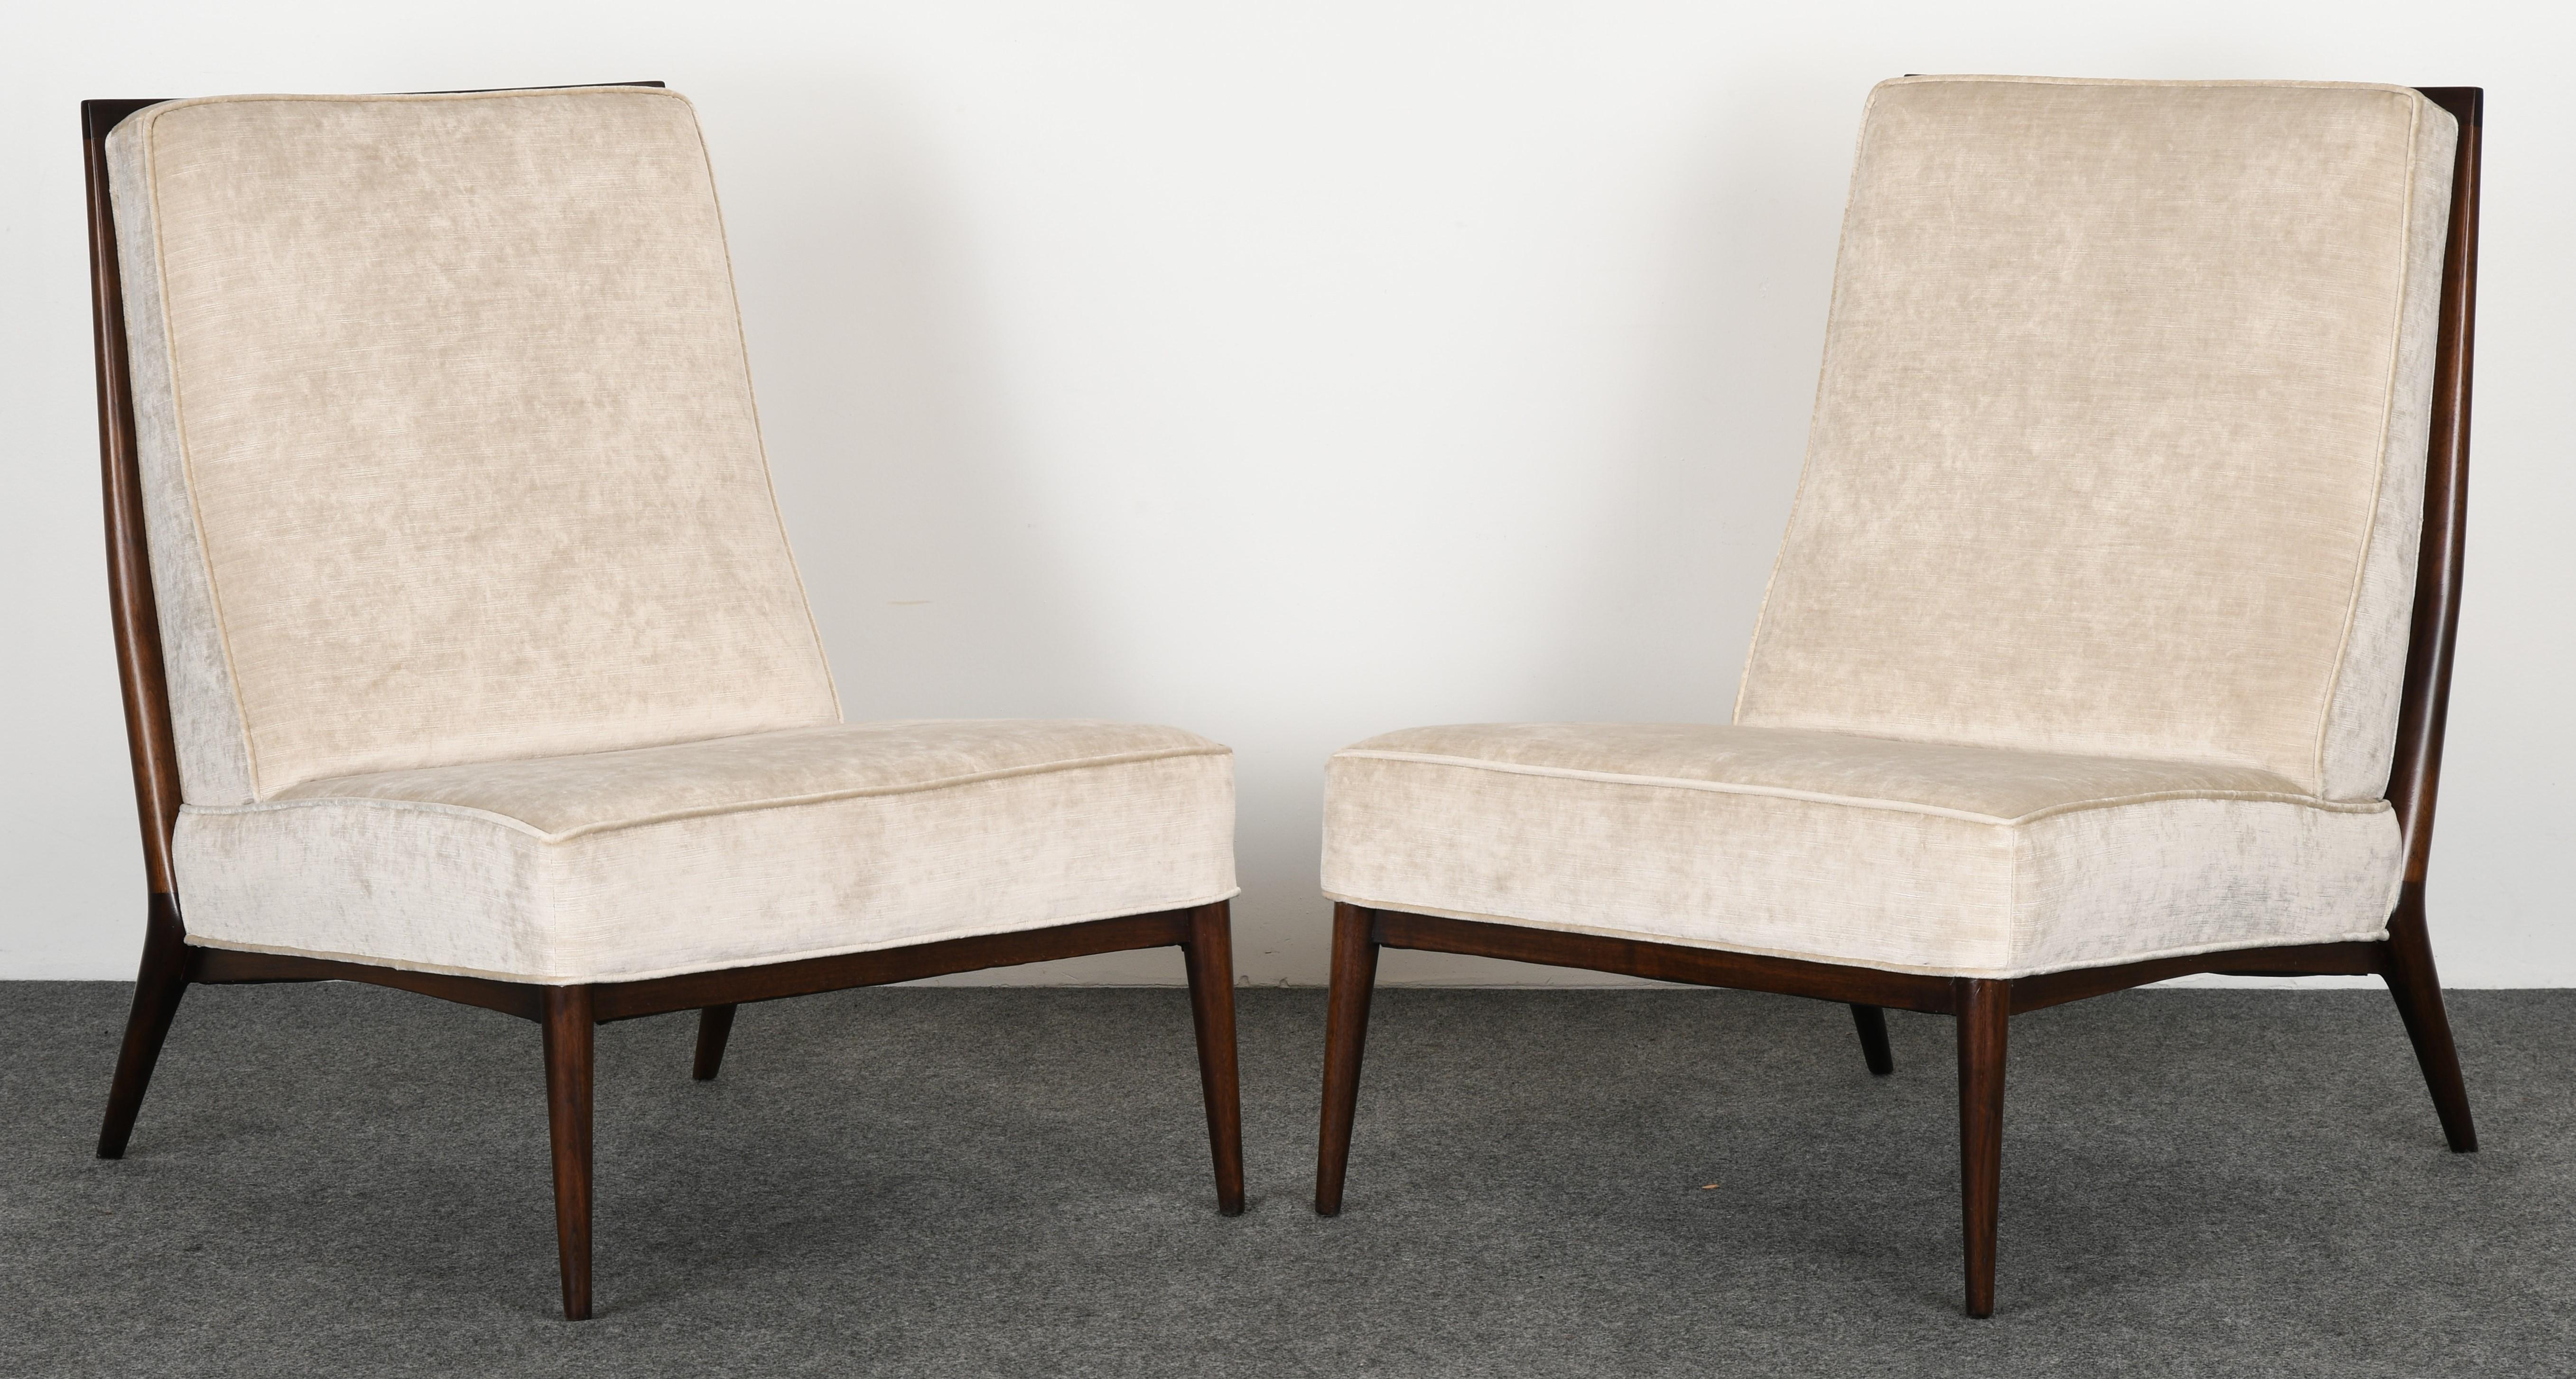 Upholstery Pair of Paul McCobb Slipper Chairs for Directional, 1950s